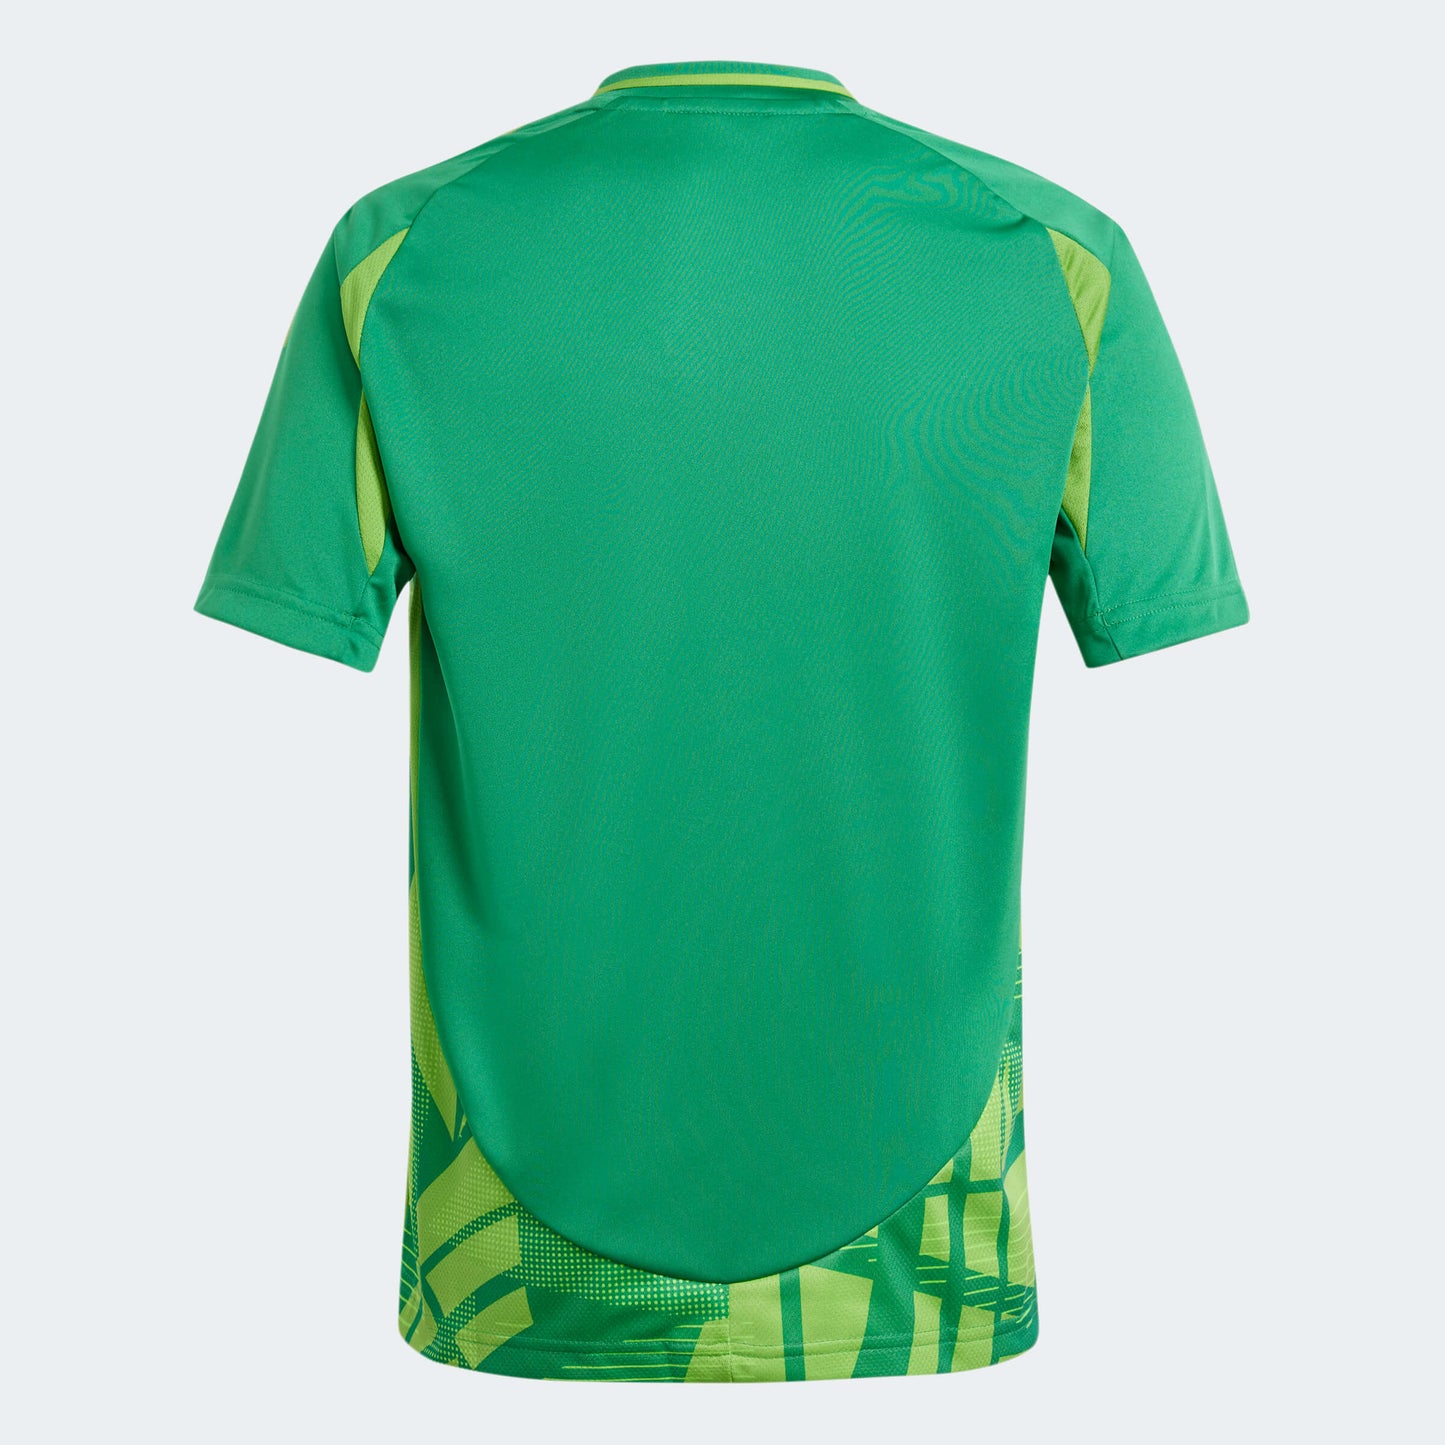 adidas YOUTH Tiro24 Competition Match Jersey Team Green (Back)